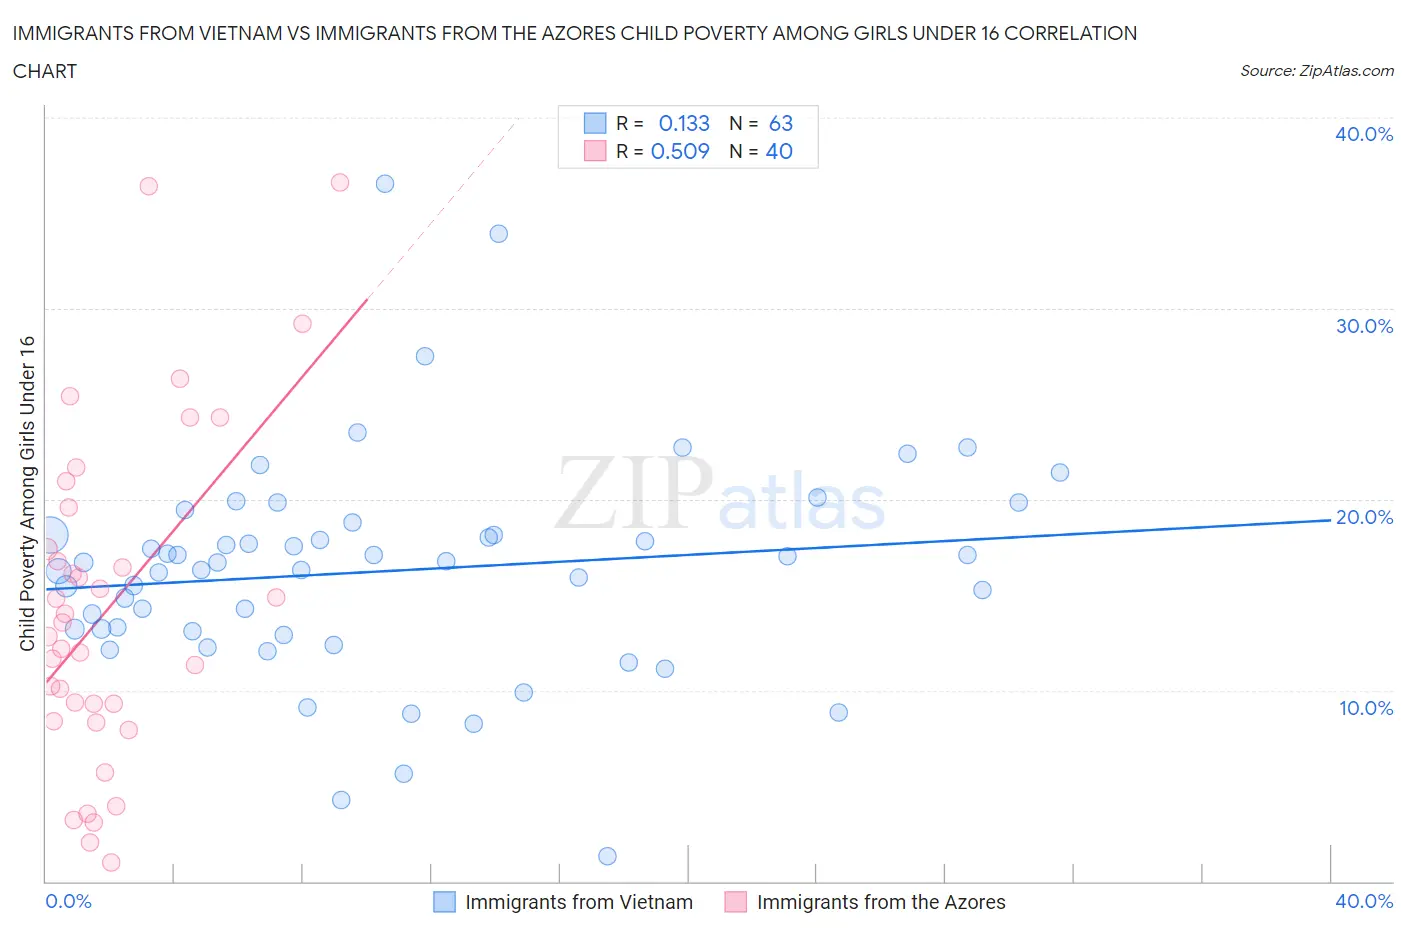 Immigrants from Vietnam vs Immigrants from the Azores Child Poverty Among Girls Under 16